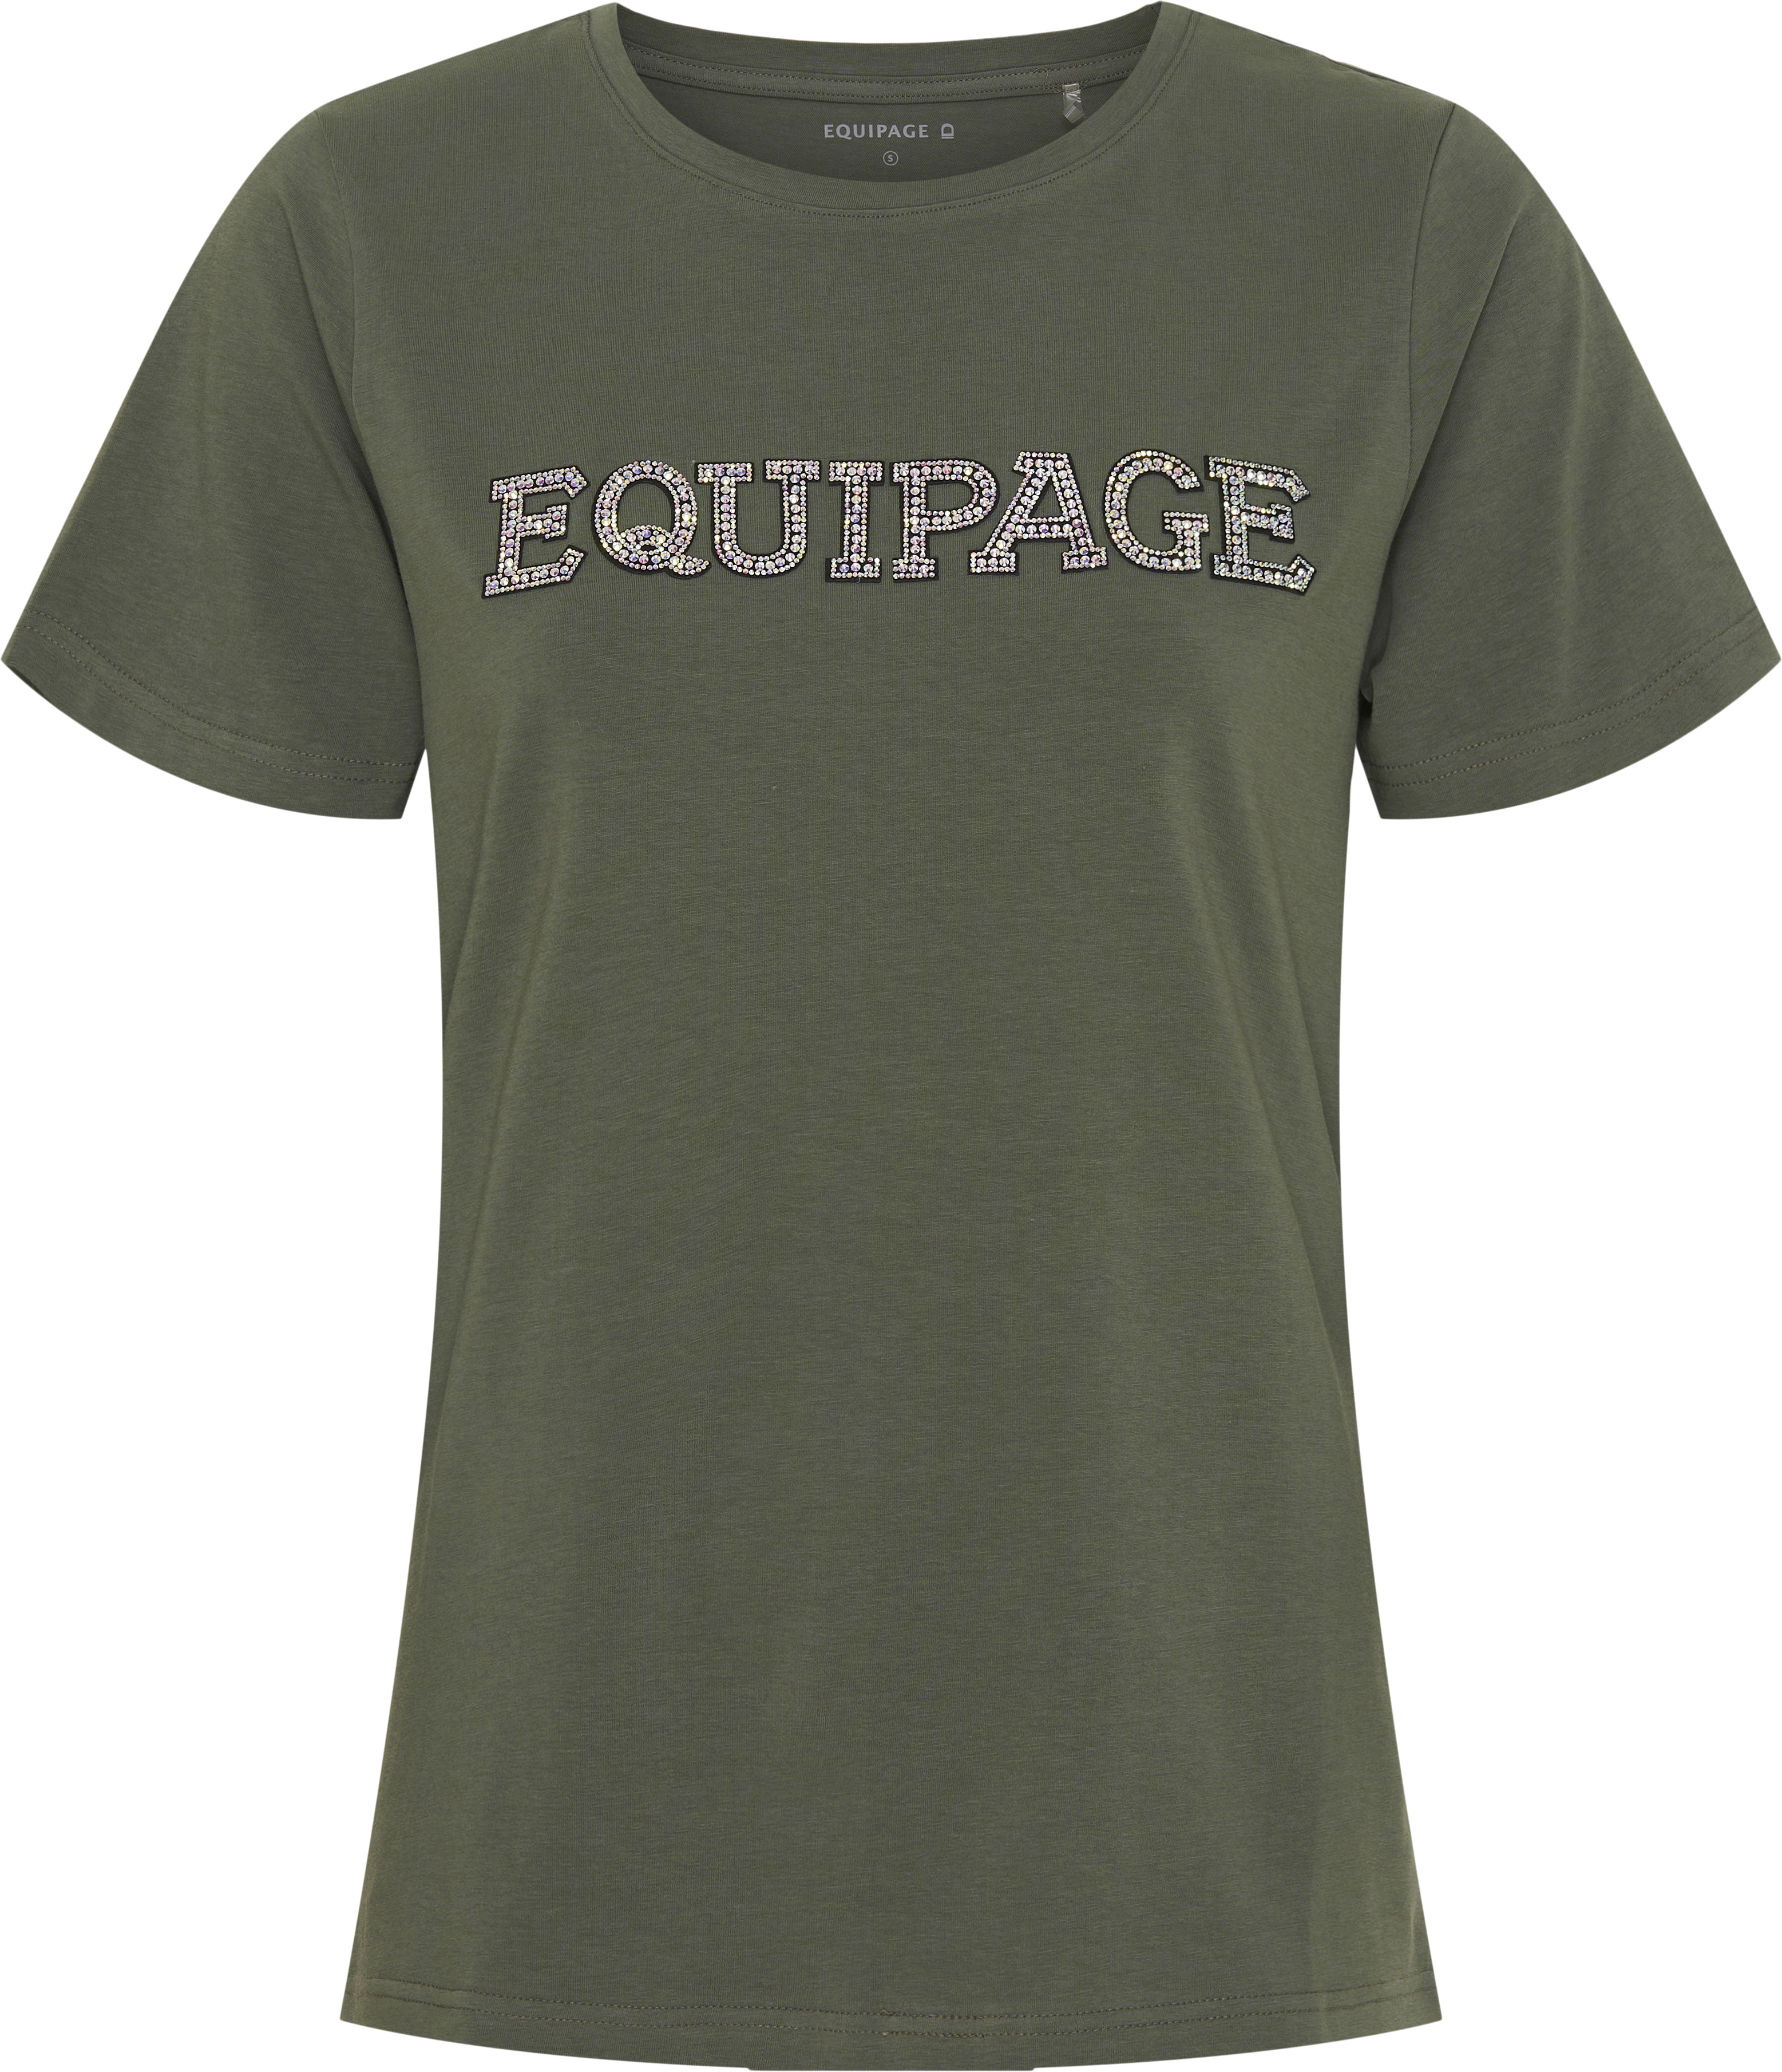 Equipage Melina T-Shirt - Forest (L)